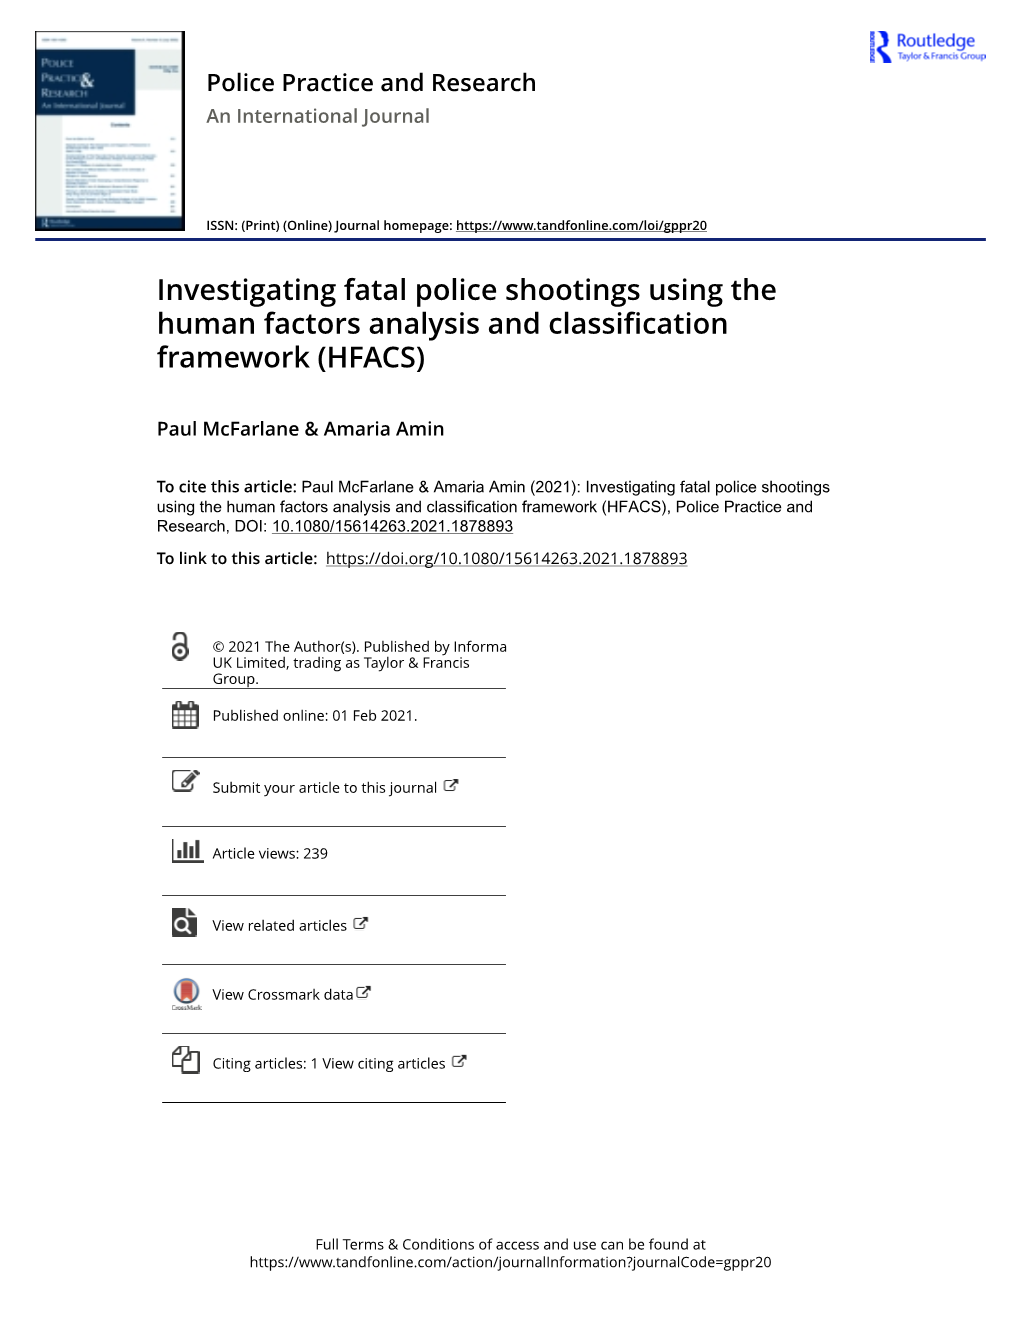 Investigating Fatal Police Shootings Using the Human Factors Analysis and Classification Framework (HFACS)